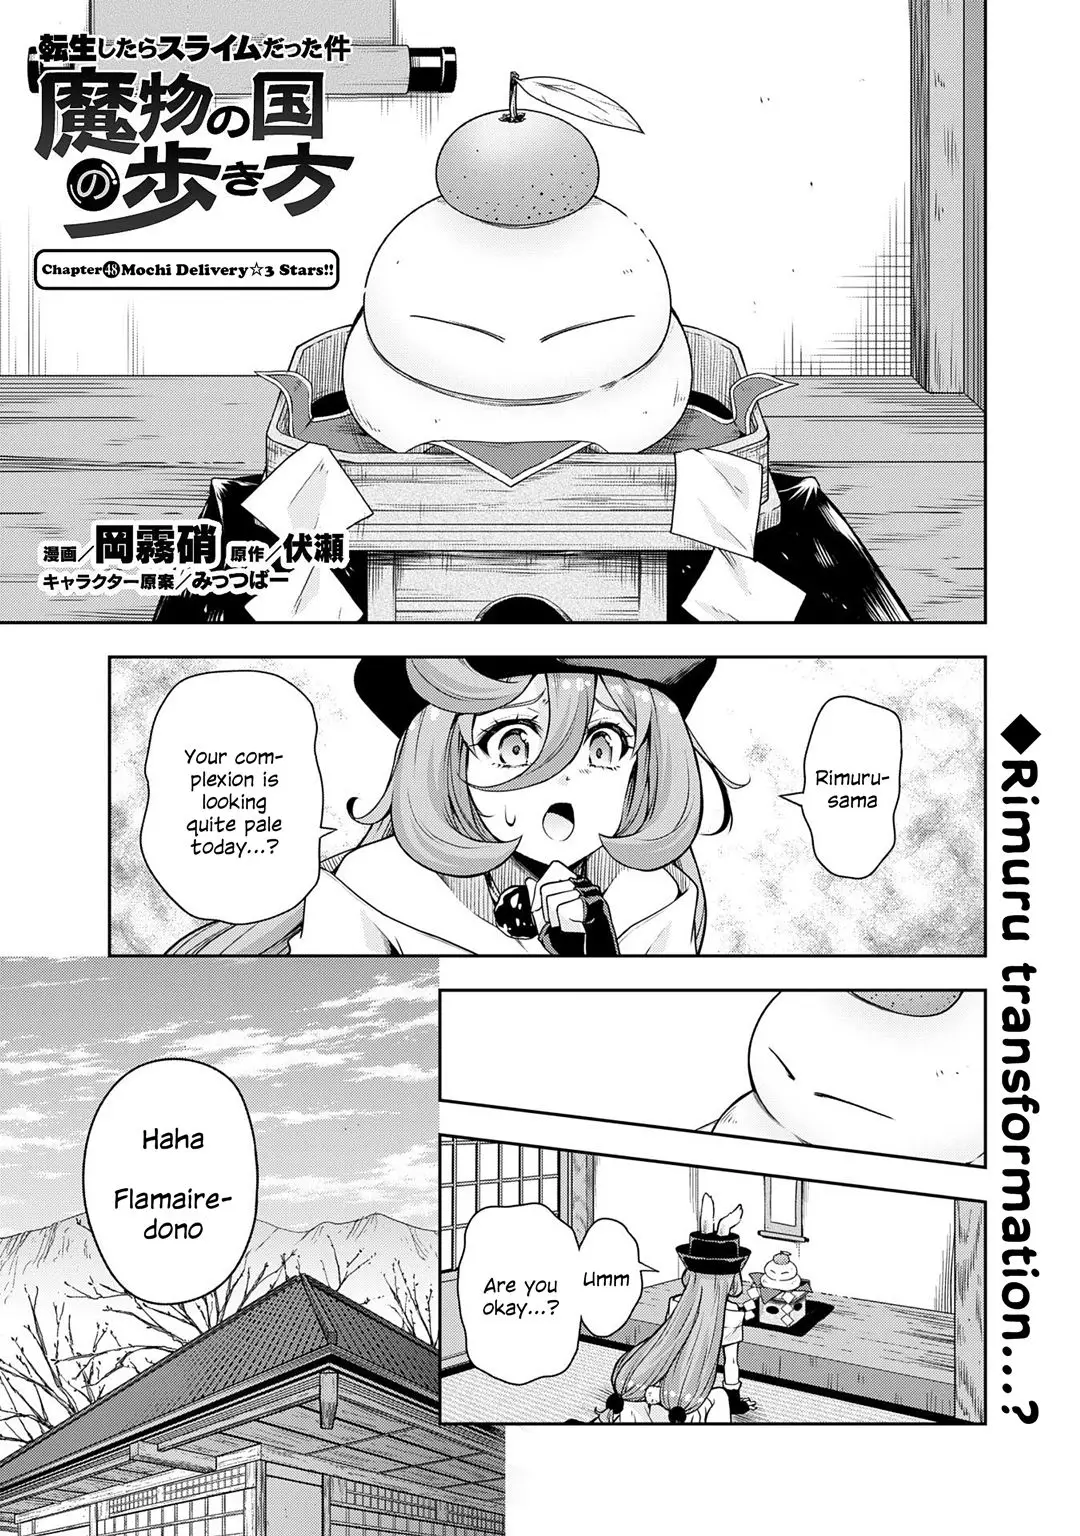 Tensei Shitara Slime Datta Ken: The Ways of Strolling in the Demon Country - 48 page 1